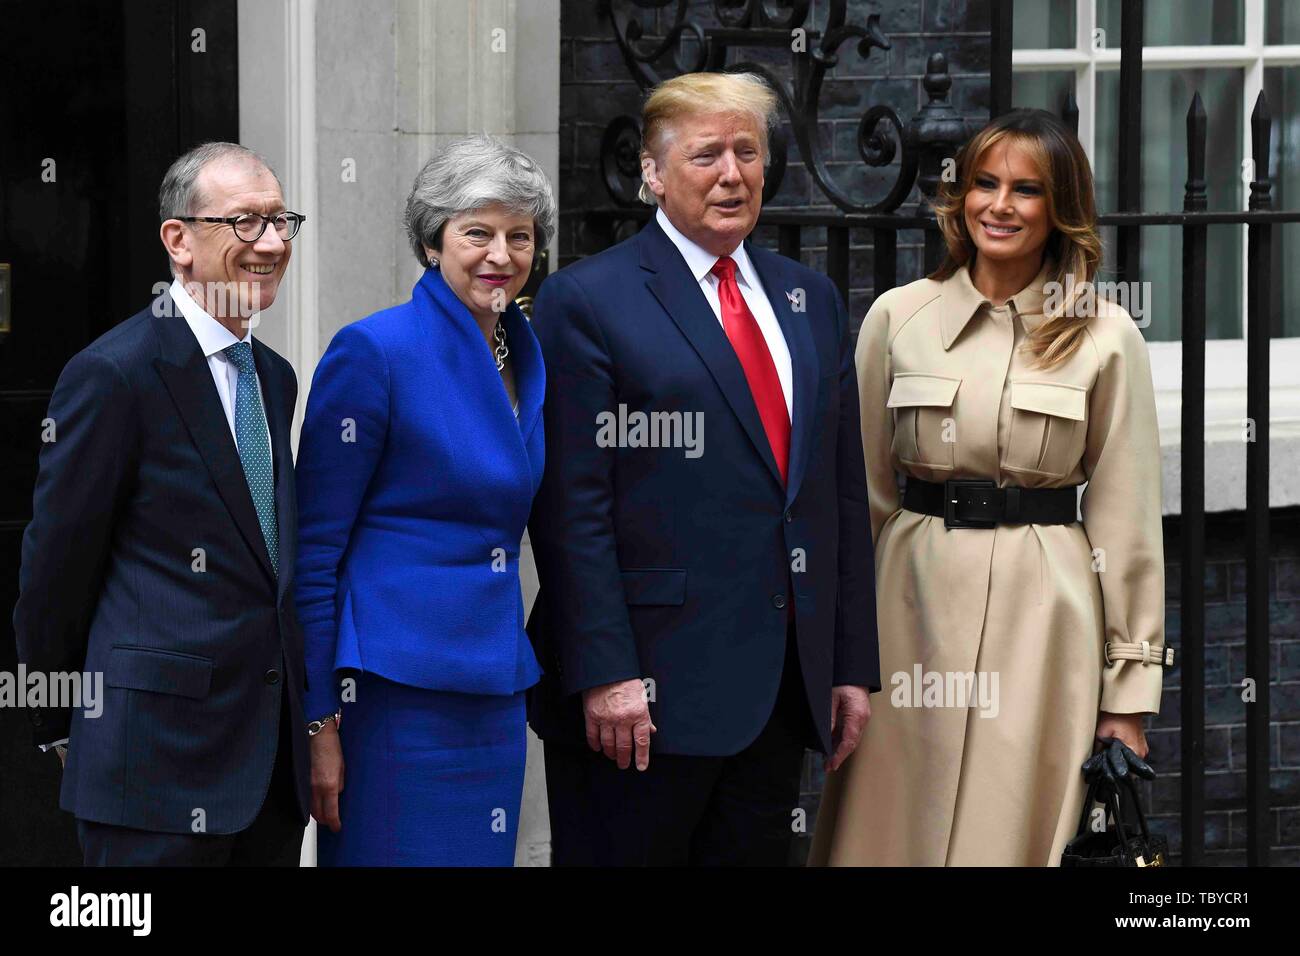 London, UK. 4th June, 2019. U.S. President Donald Trump (2nd R) and First Lady Melania Trump (1st R) pose for photos with British Prime Minister Theresa May (2nd L) and her husband Philip May (1st L) at 10 Downing Street in London, Britain on June 4, 2019. Credit: Alberto Pezzali/Xinhua/Alamy Live News Stock Photo